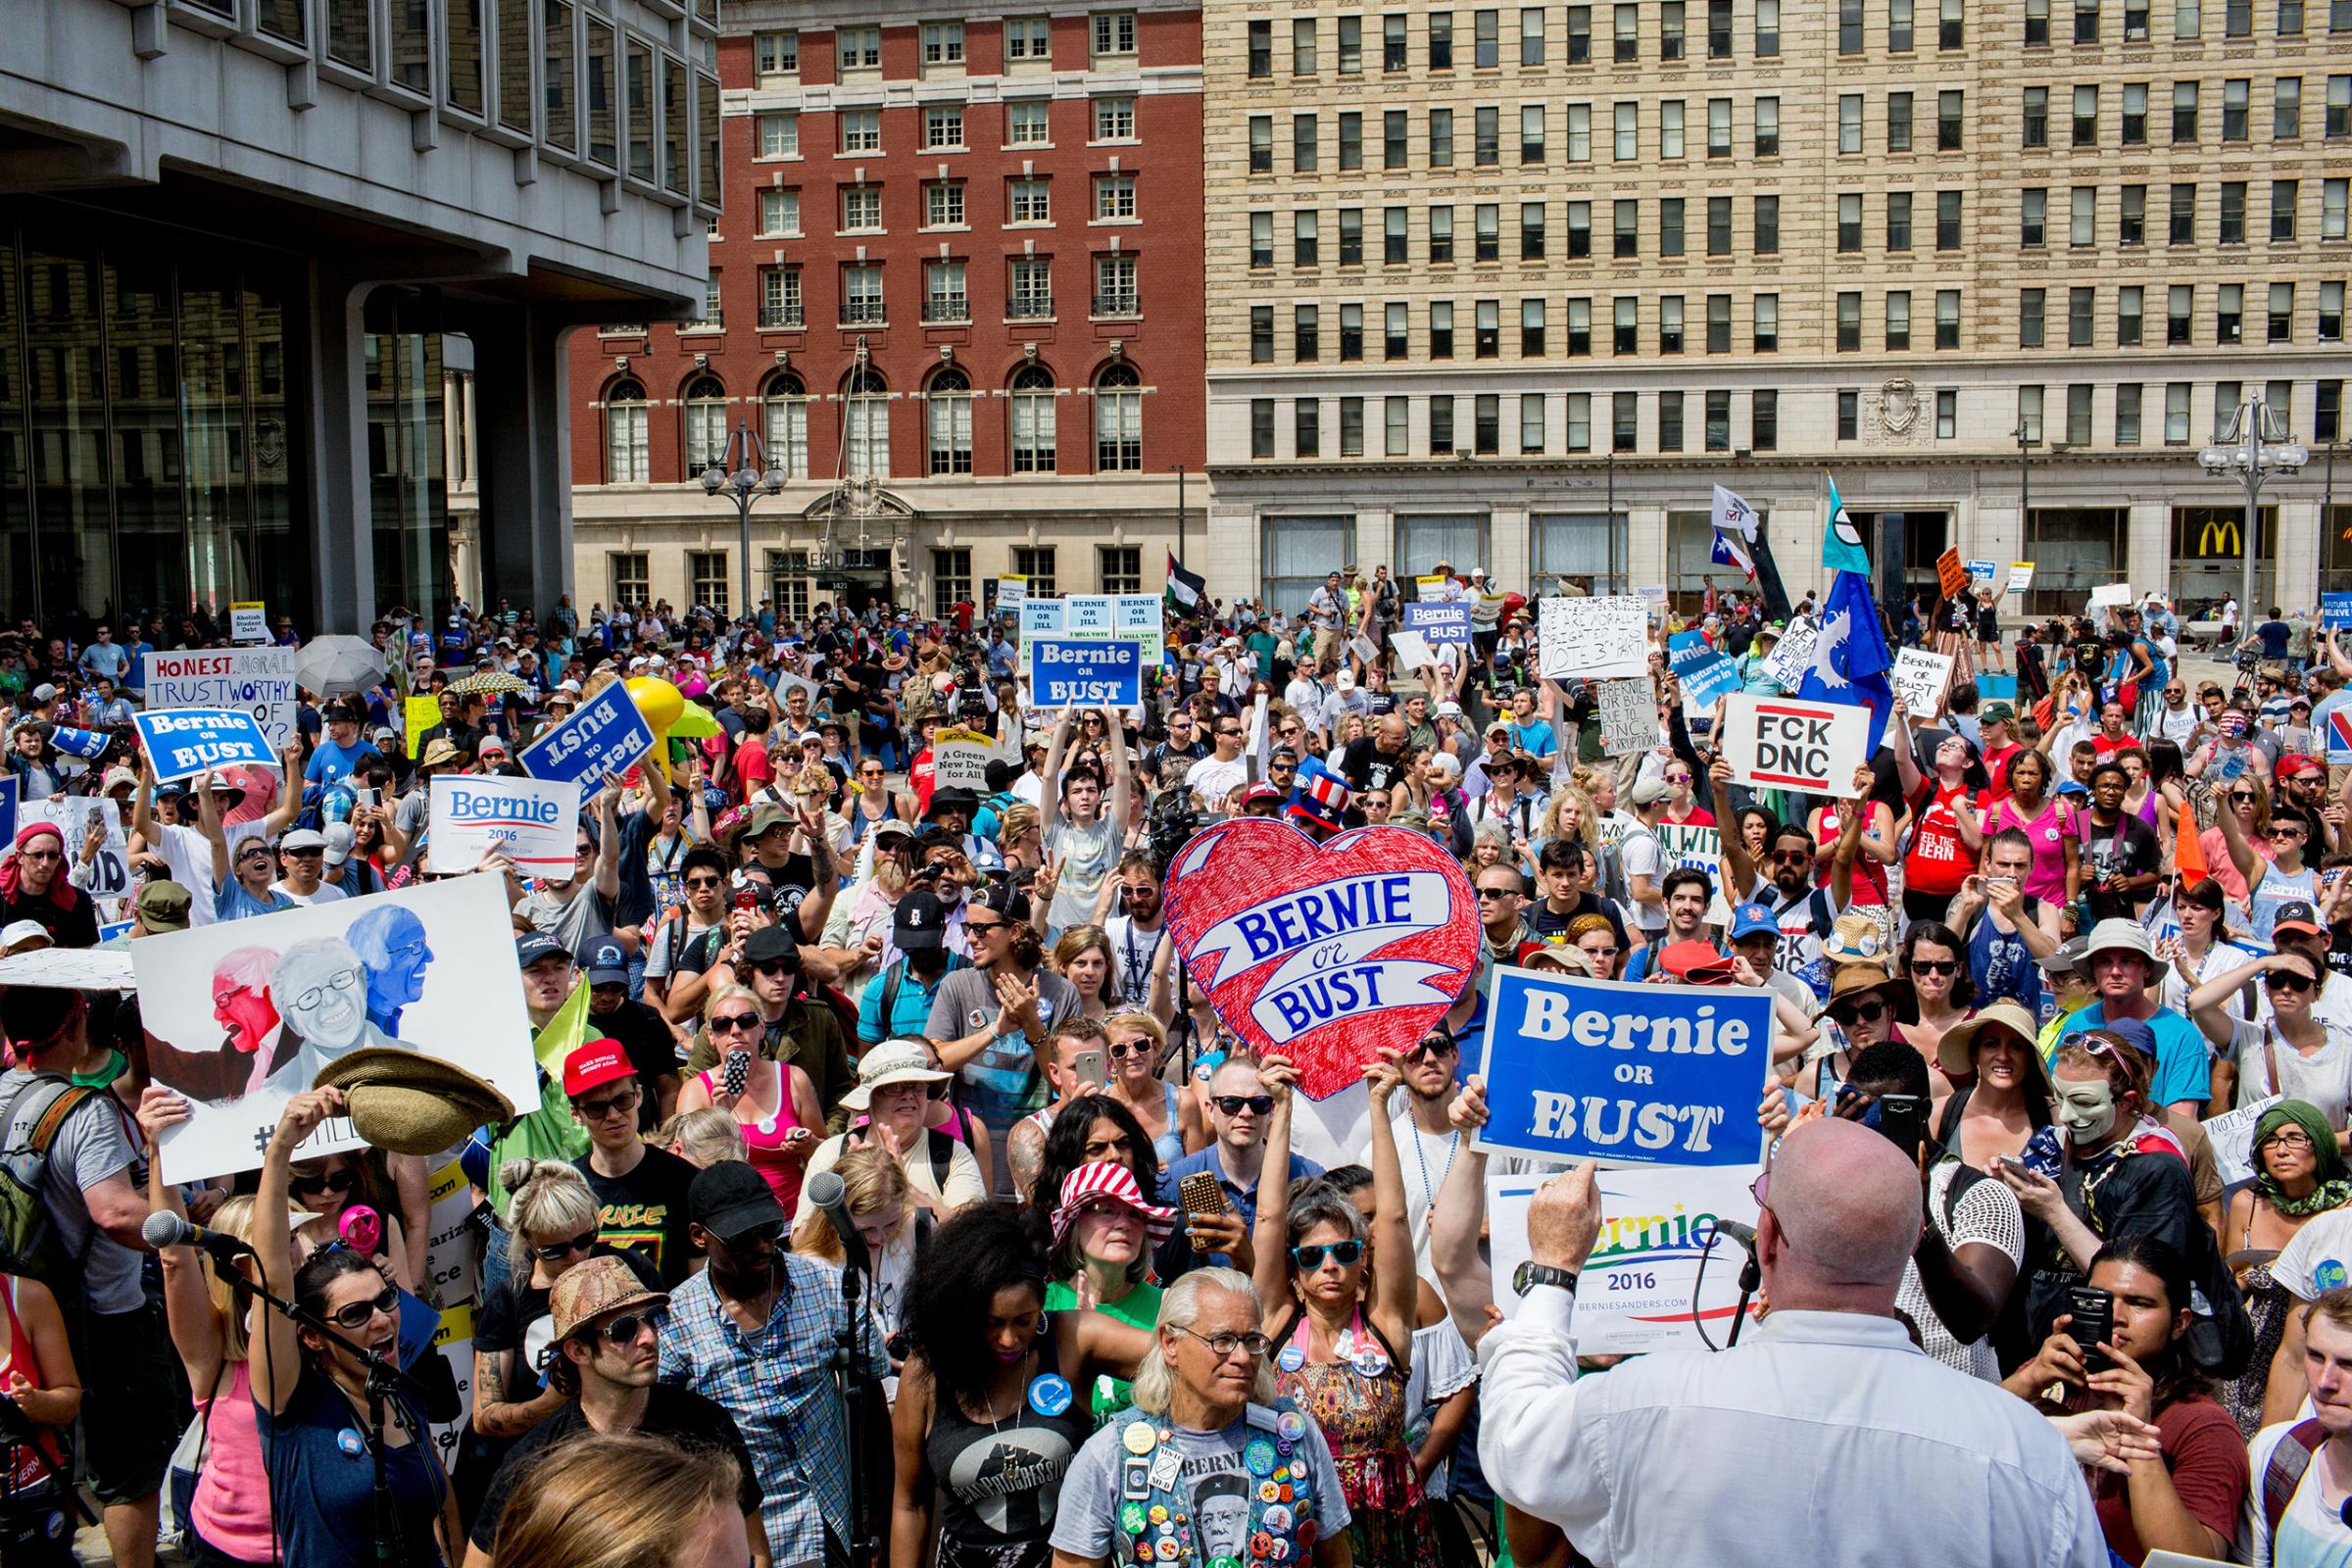 Protesters convened at City Hall in Philadelphia on Tuesday afternoon to watch speaker Jill Stein and protest theDemocratic National Convention at the Wells Fargo Center on July 26, 2016 in Philadelphia.(Natalie Keyssar for TIME)